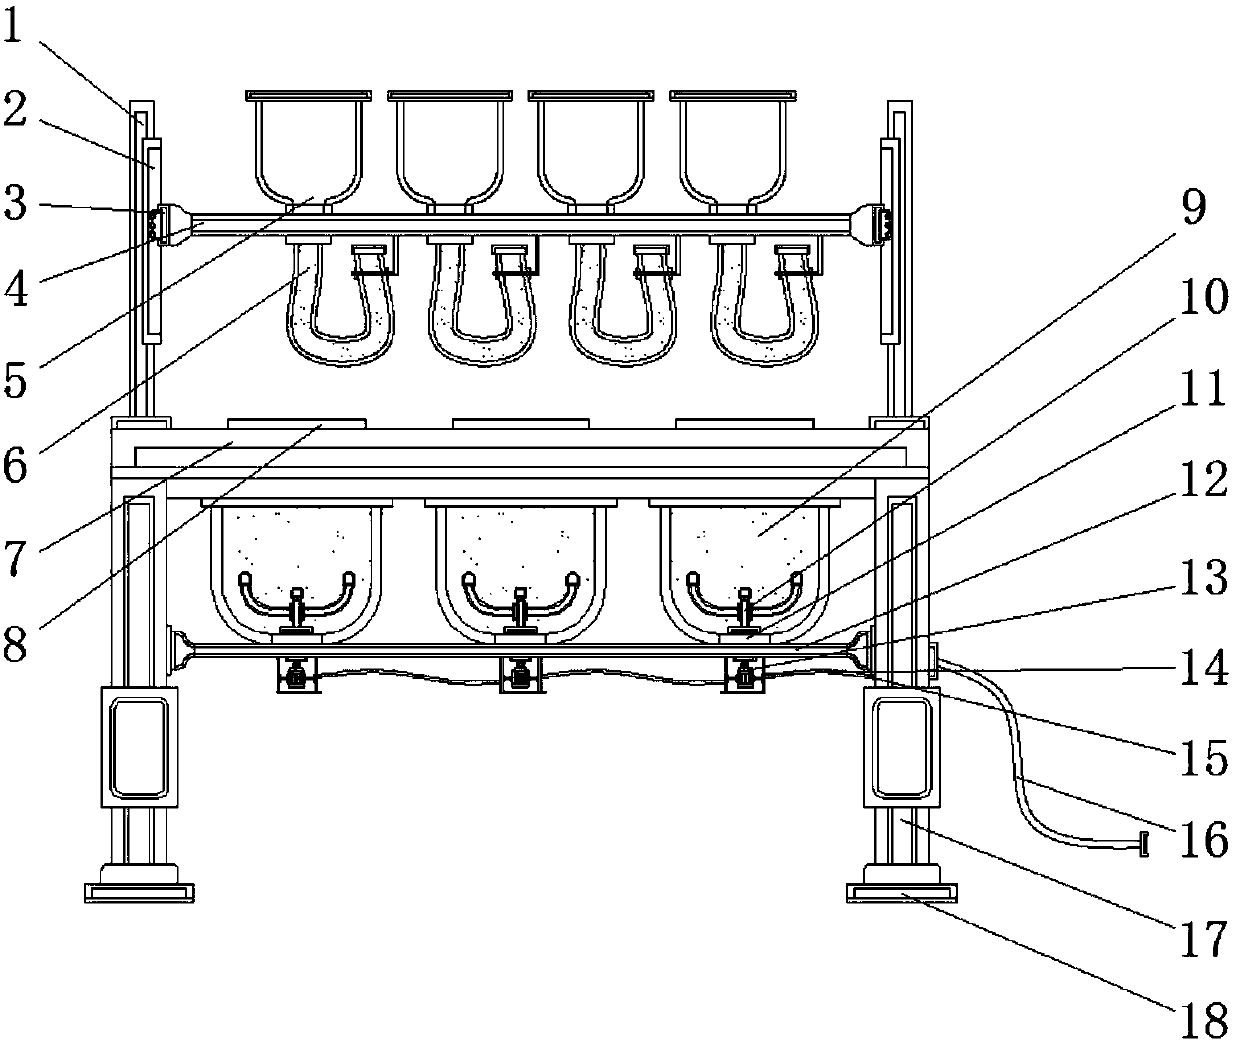 Rapid blending device for aquatic feed production